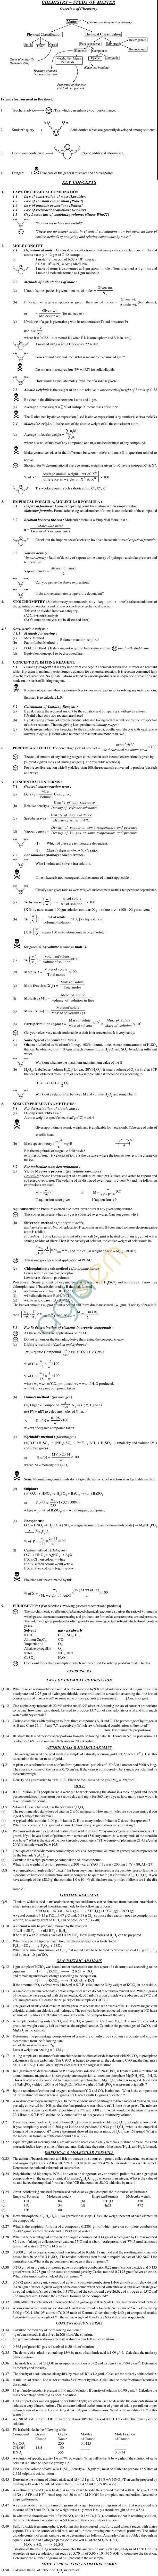 Chemistry Study Material - Chapter 1